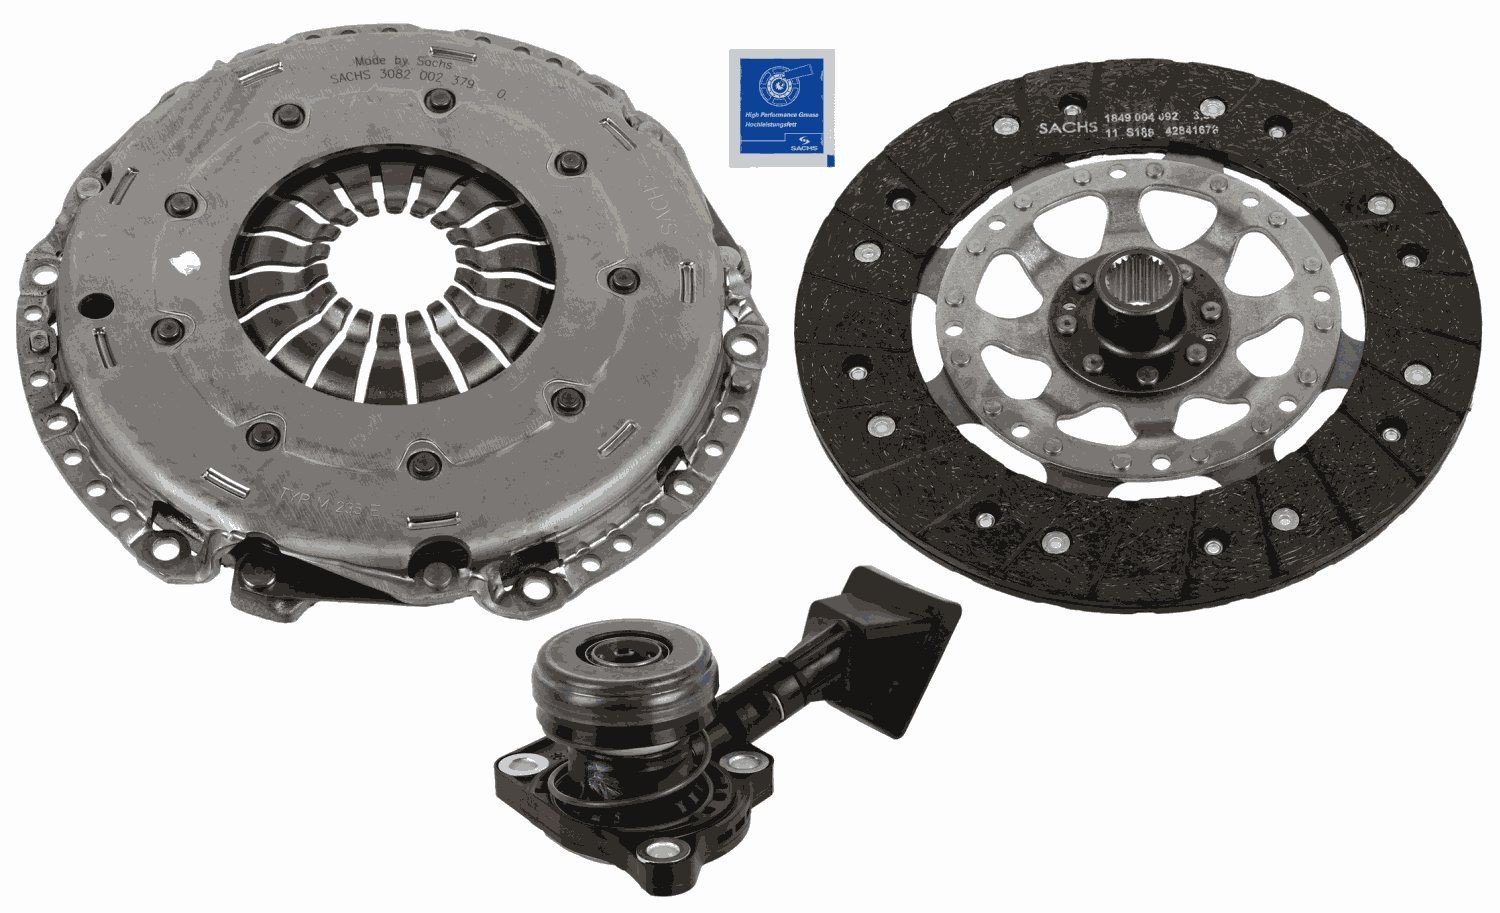 Original SACHS Clutch replacement kit 3000 990 558 for CITROЁN DS4